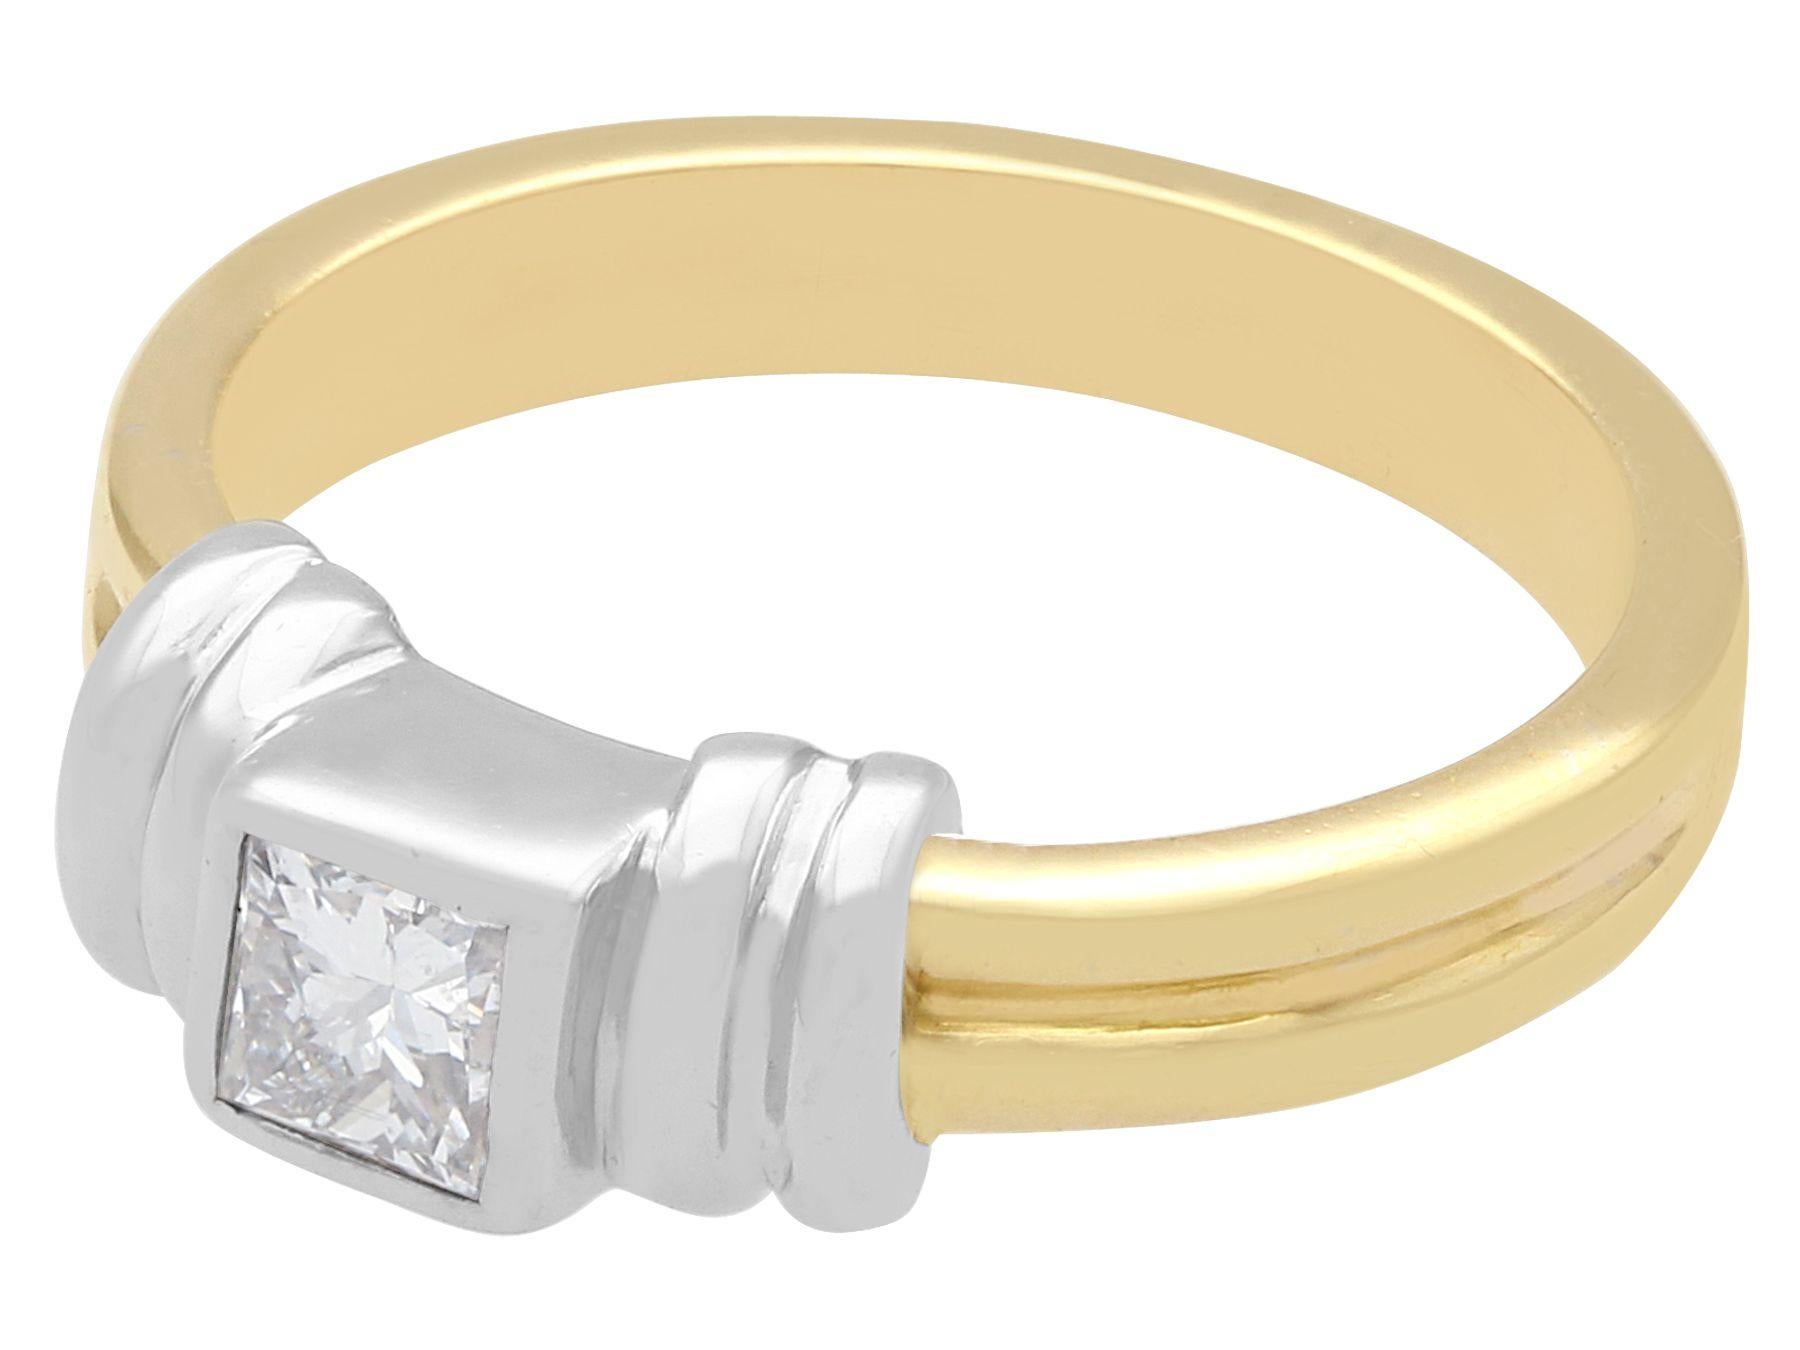 Art Deco Style Diamond and Gold Solitaire Ring In Excellent Condition For Sale In Jesmond, Newcastle Upon Tyne